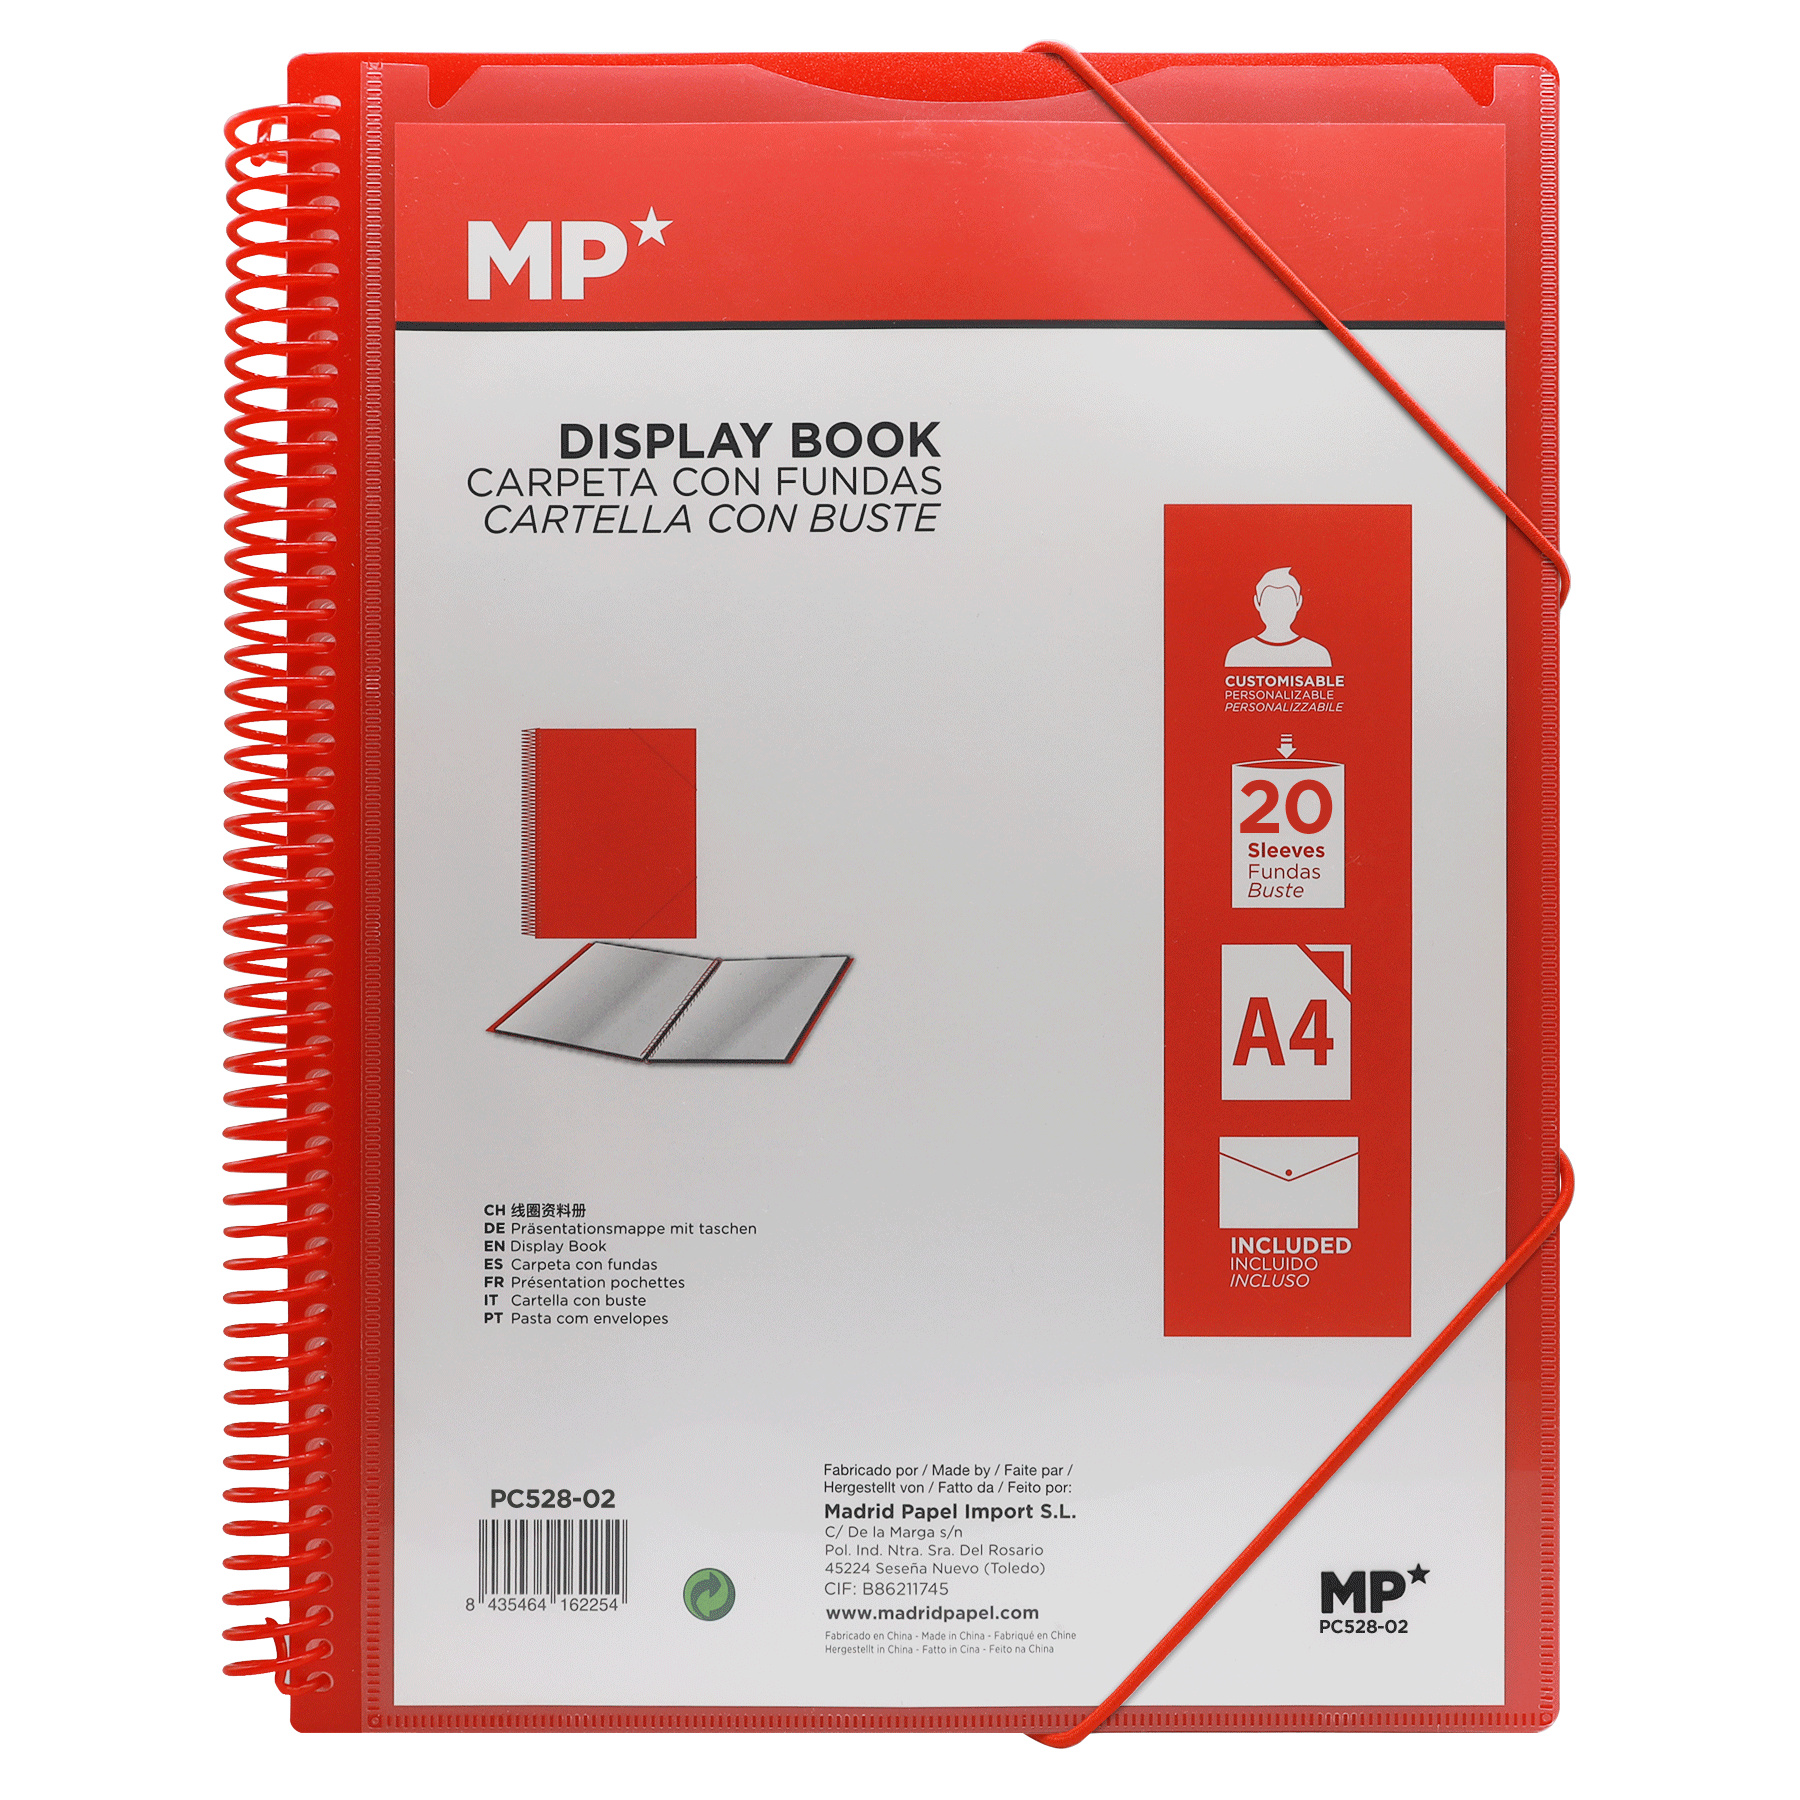 PC528-02 Polypropylene Display Book Folder with Spiral and Elastic Bands, Red, 20 sleeves